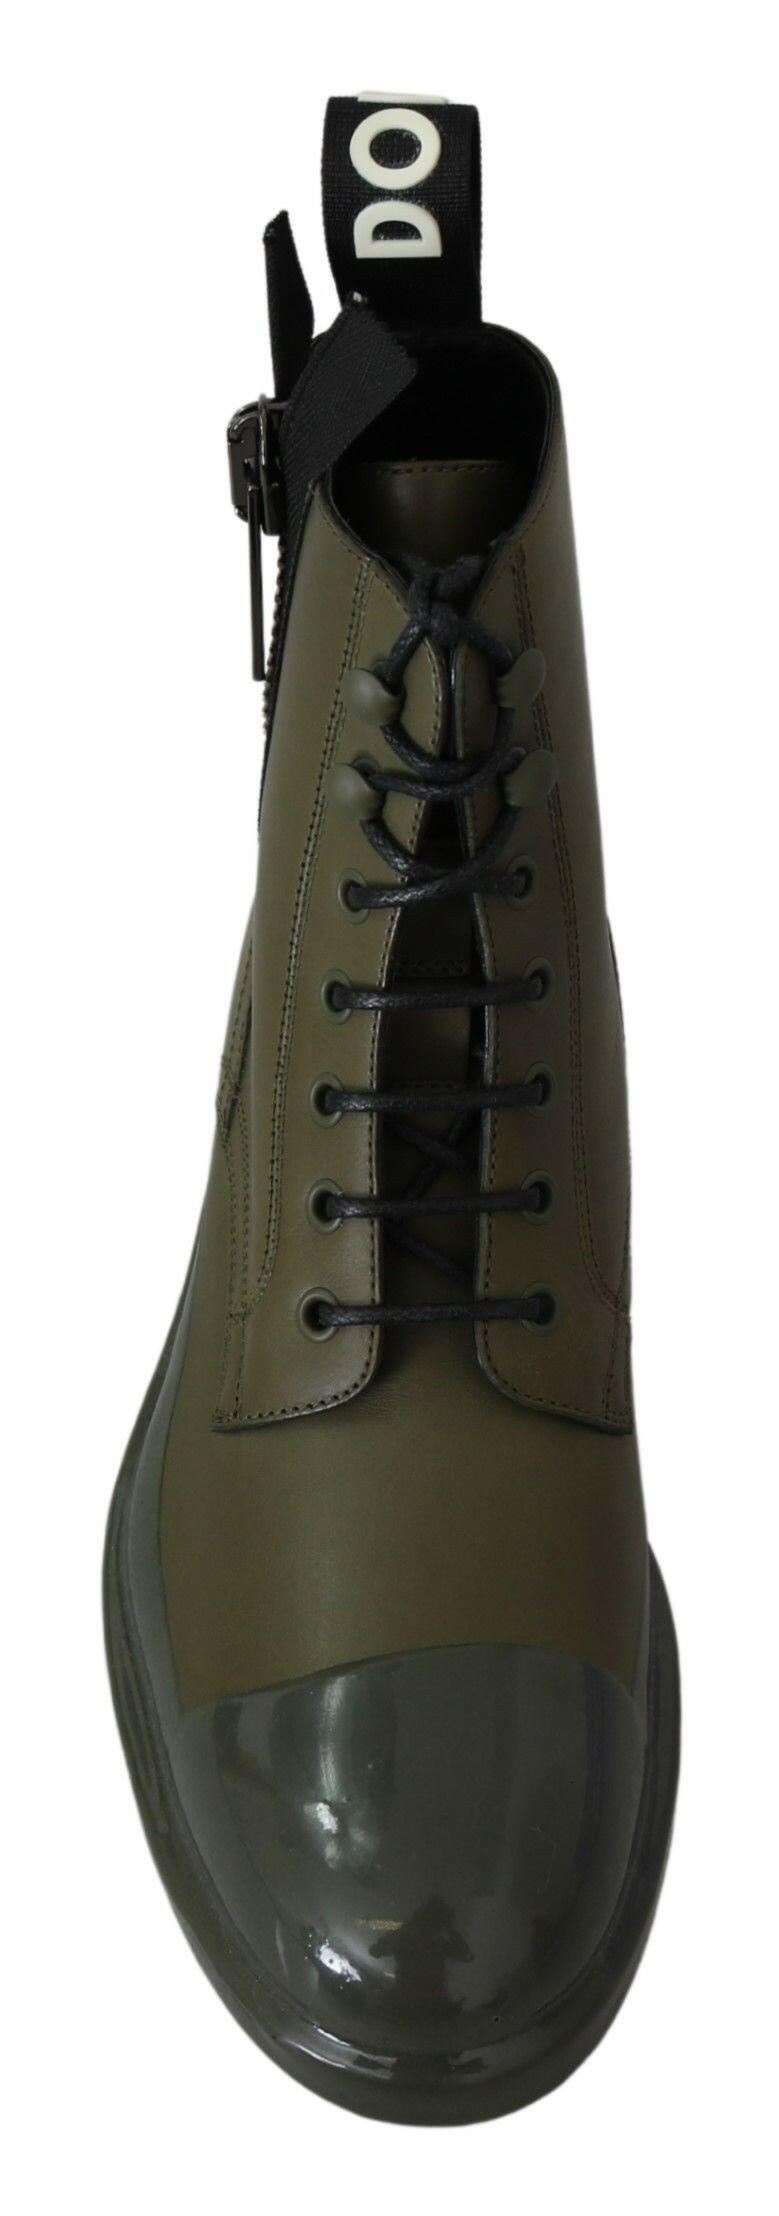 Dolce & Gabbana Green Leather Boots Zipper Mens Shoes - GENUINE AUTHENTIC BRAND LLC  